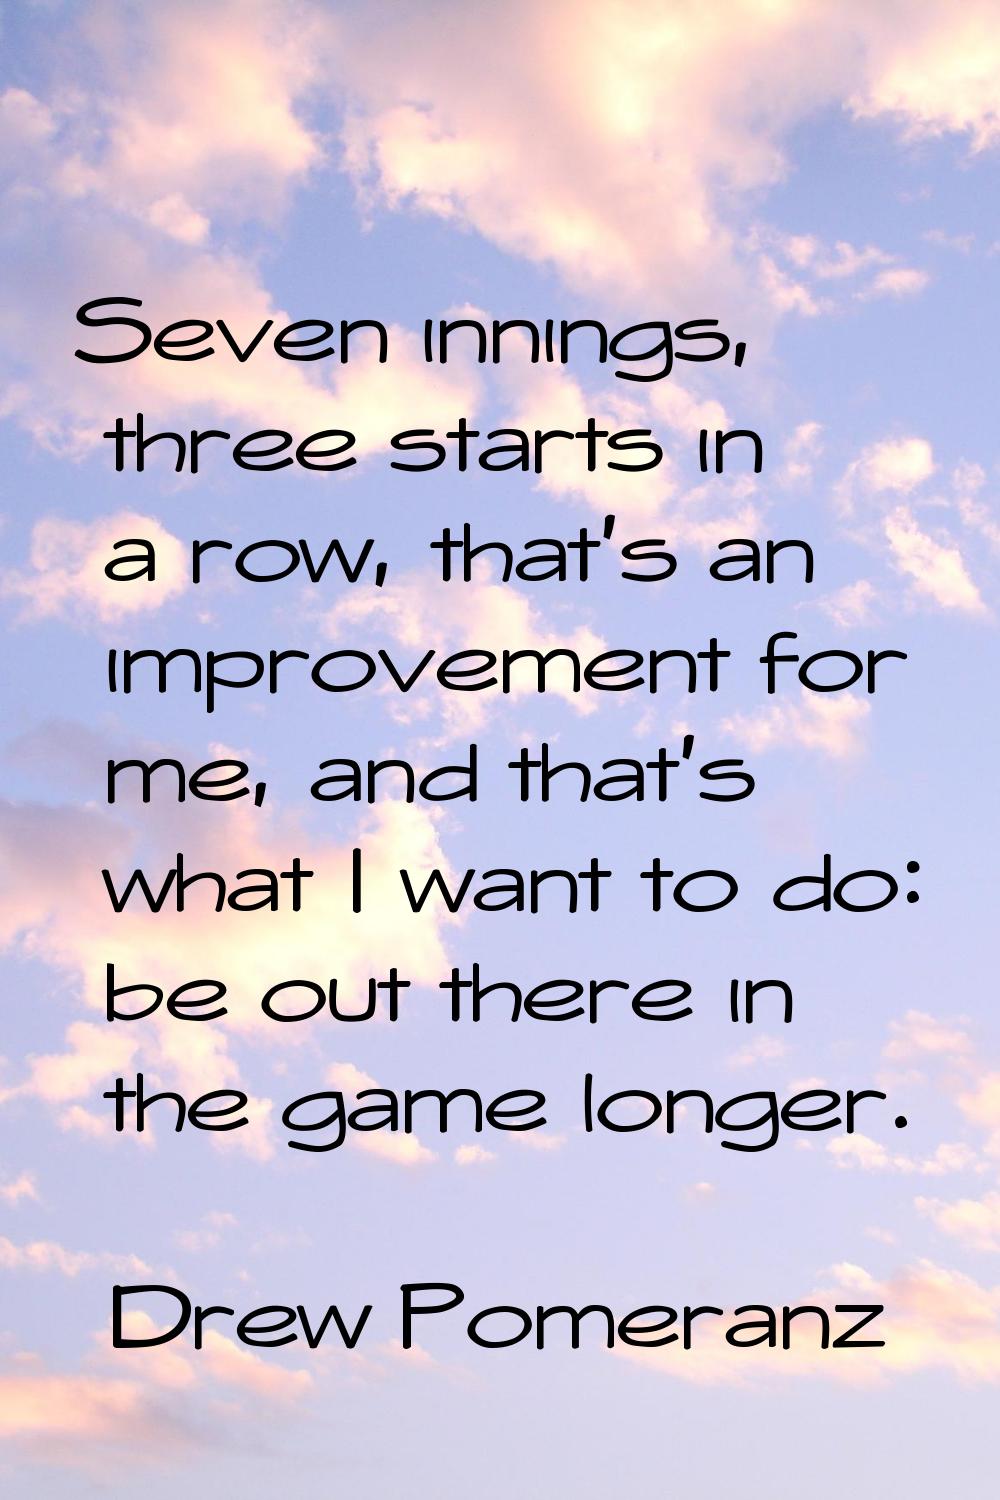 Seven innings, three starts in a row, that's an improvement for me, and that's what I want to do: b